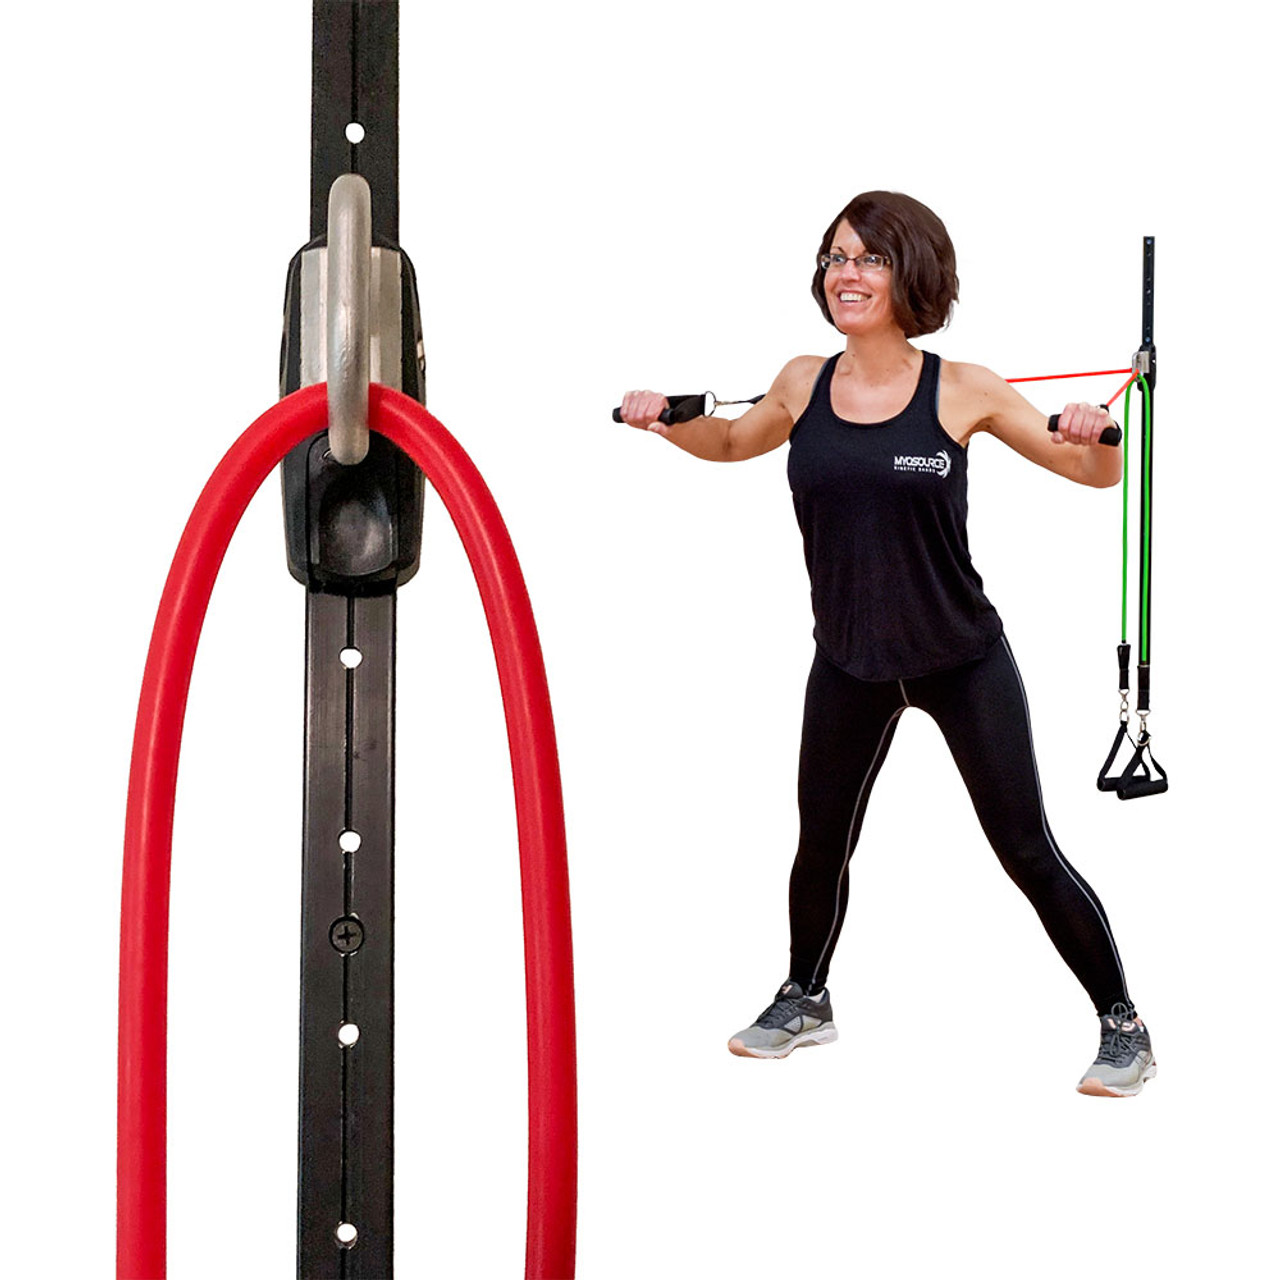 Door anchor for your exercise band - HOOK